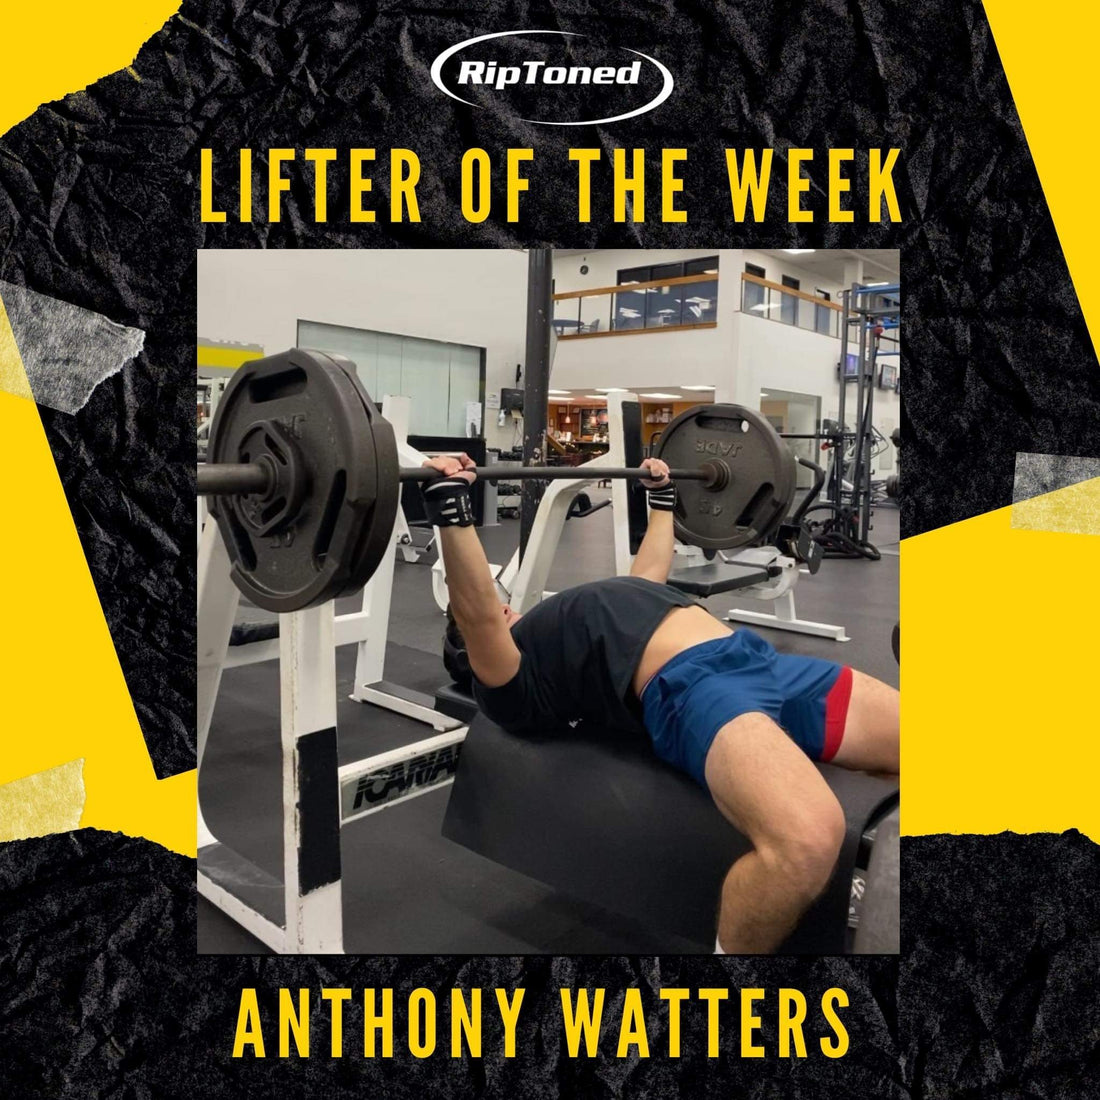 Lifter of the Week - Anthony Watters - Rip Toned